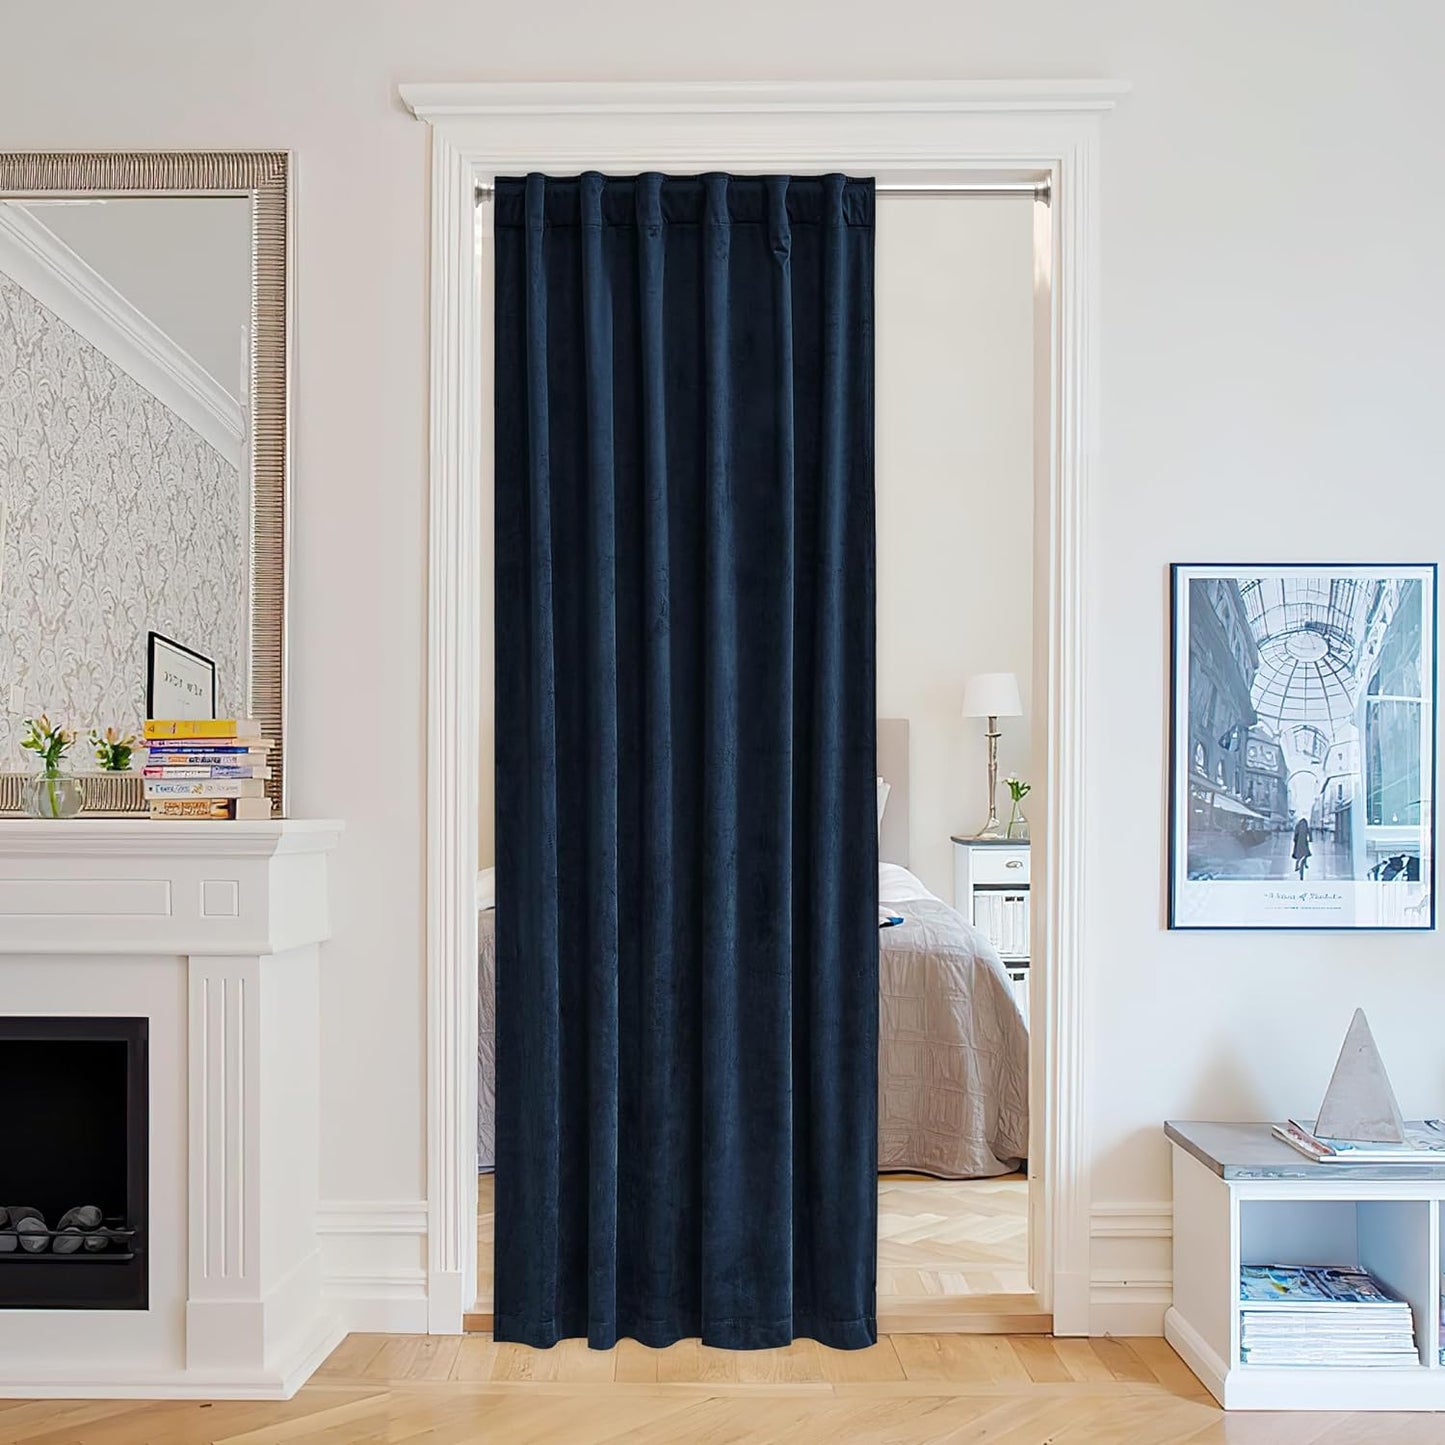 Stangh Navy Blue Velvet Curtains 96 Inches Long for Living Room, Luxury Blackout Sliding Door Curtains Thermal Insulated Window Drapes for Bedroom, W52 X L96 Inches, 1 Panel  StangH Navy Blue W52 X L80 